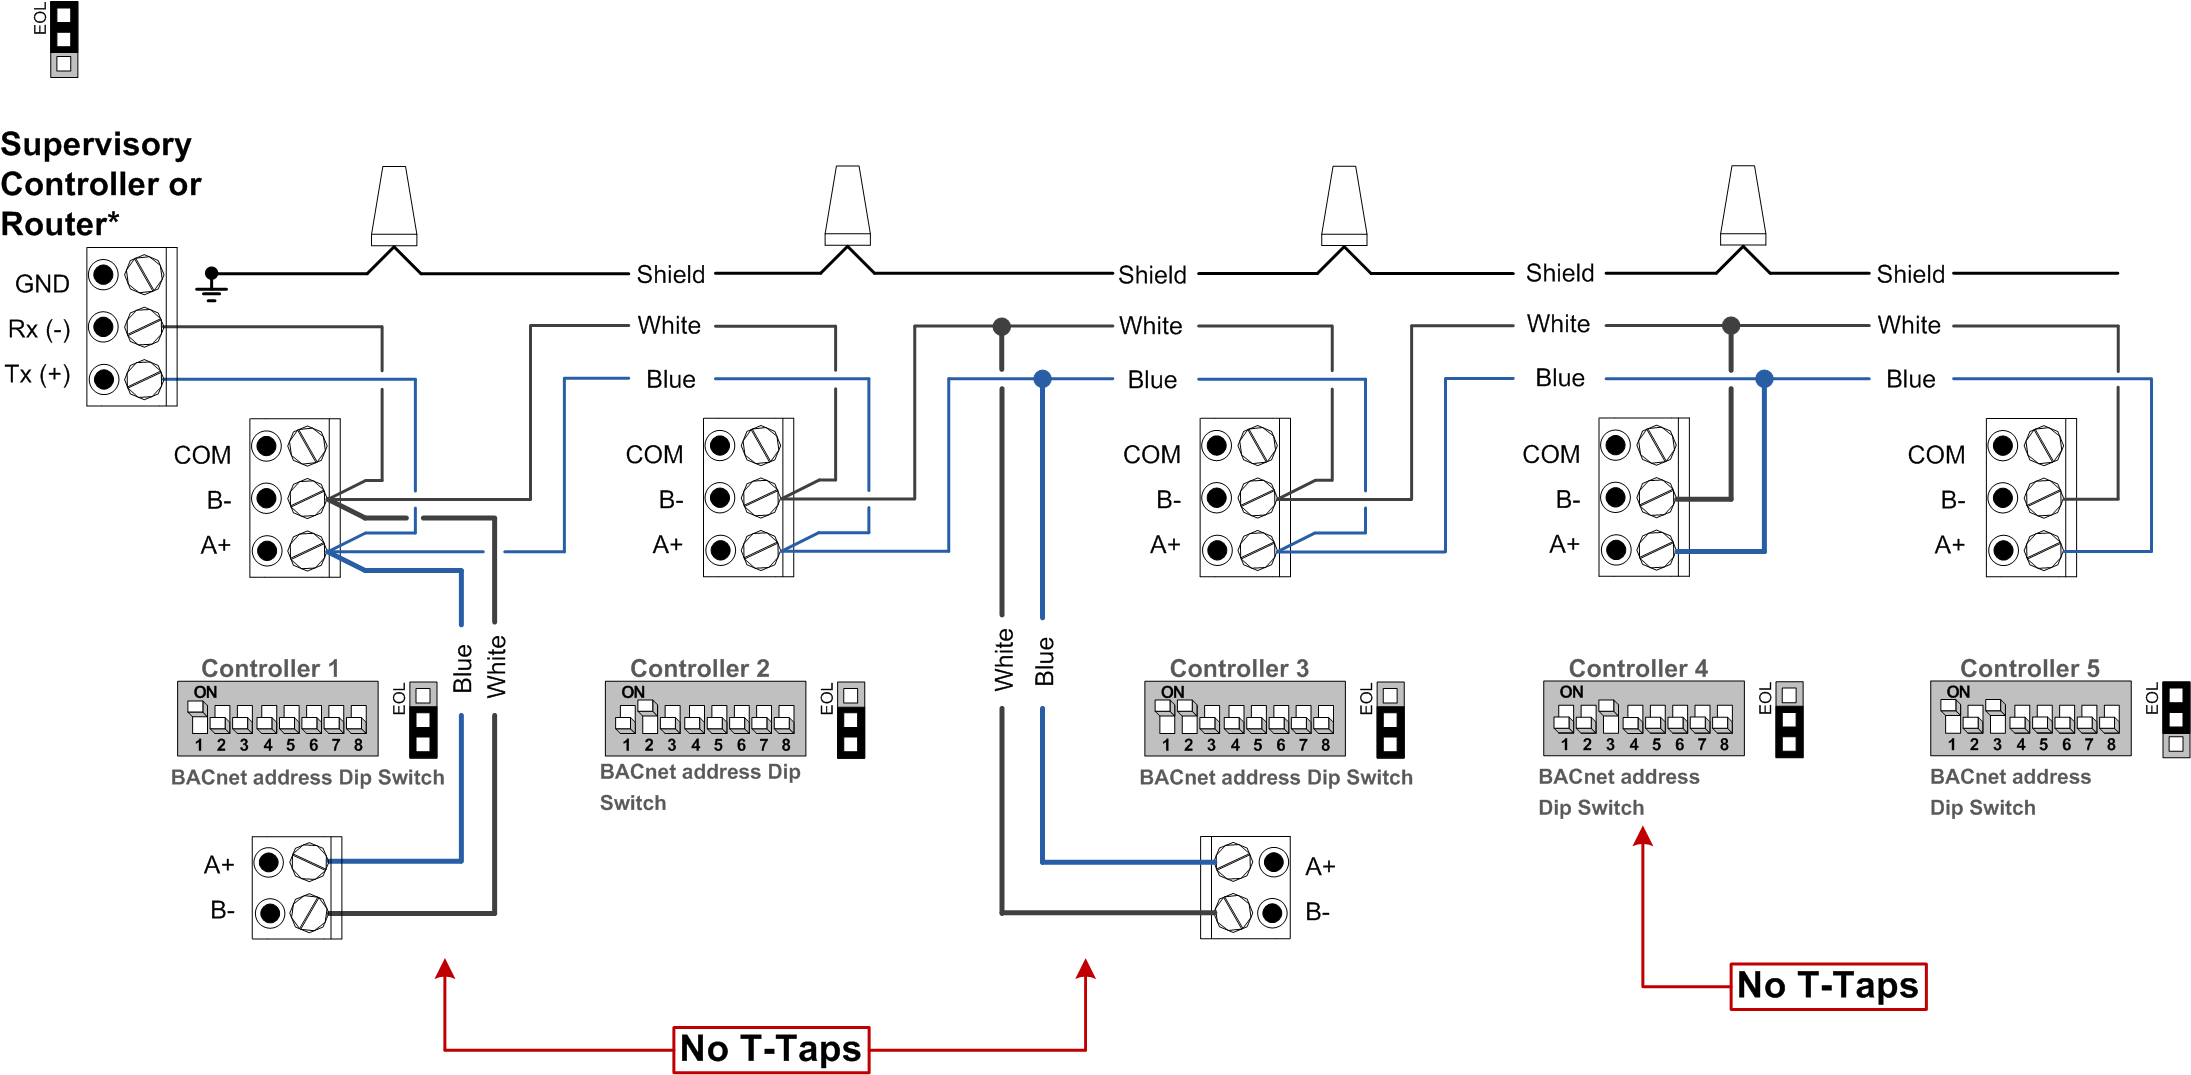 BACnet Wiring (Part 1 of 3)